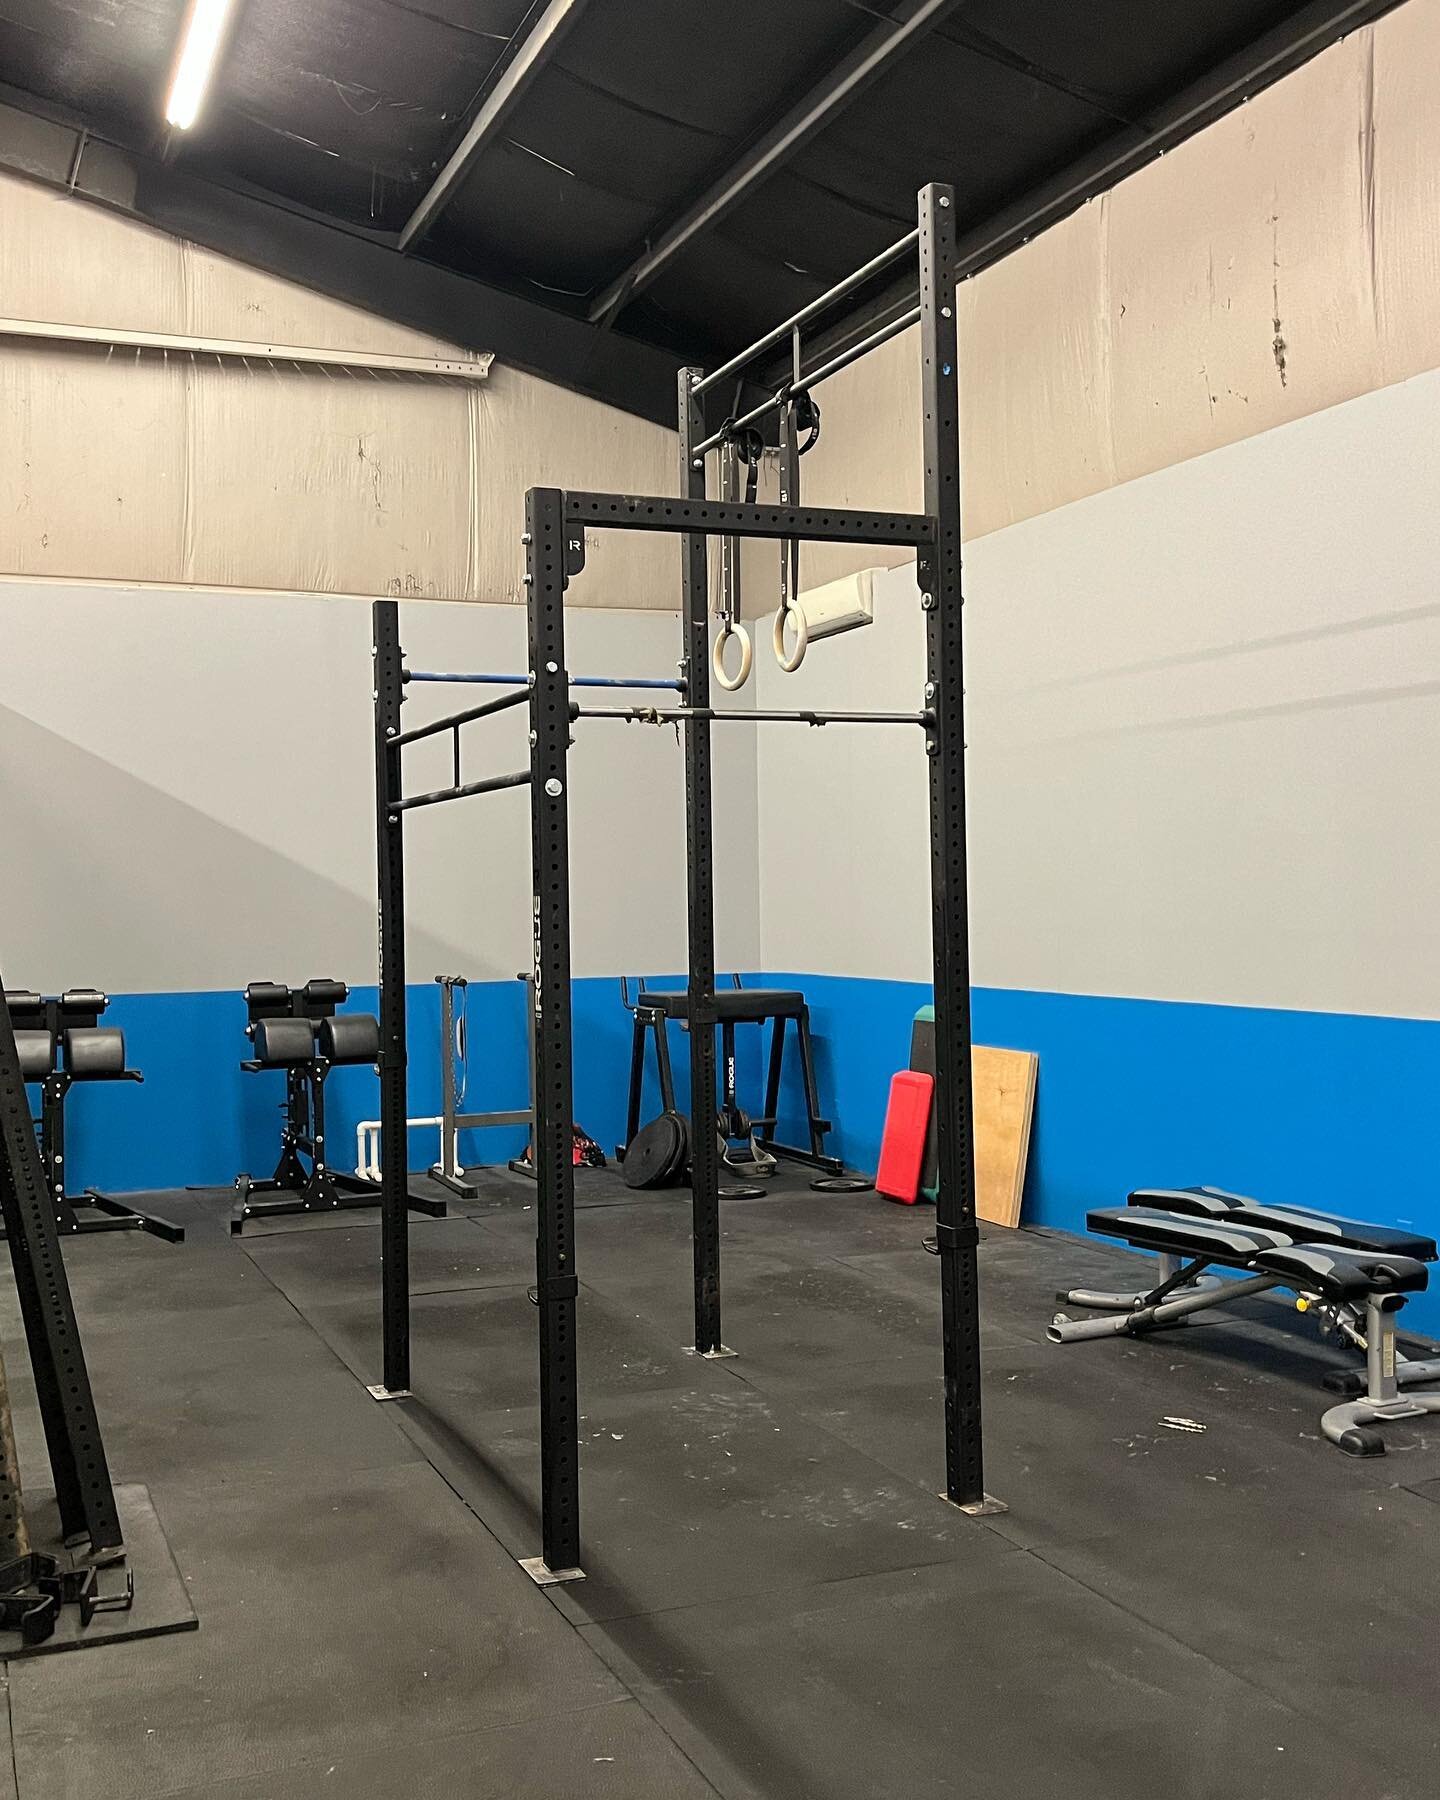 Open gym rig is up!!! 

Still need to get drilled in but it should be ready to do some fitness on tomorrow sometime. 

Huge thank you to Mr. David Needham for doing all this today for us! 

#CrossfitHSP 
#Ownersdoingownerthings 
#Opengymspaceup
#Comm